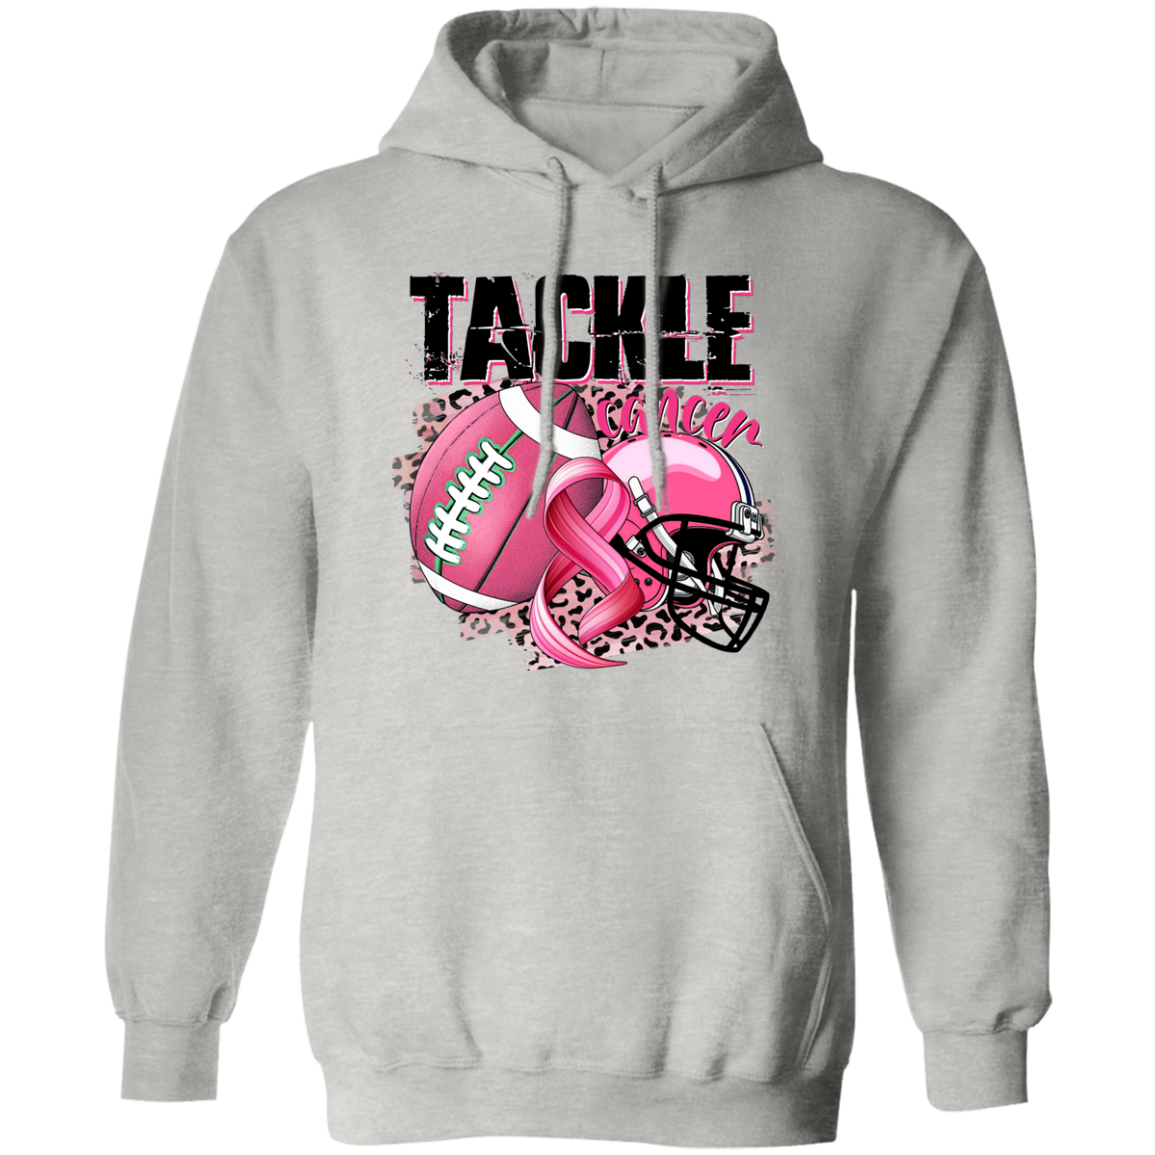 Tackle Cancer Pullover Hoodie